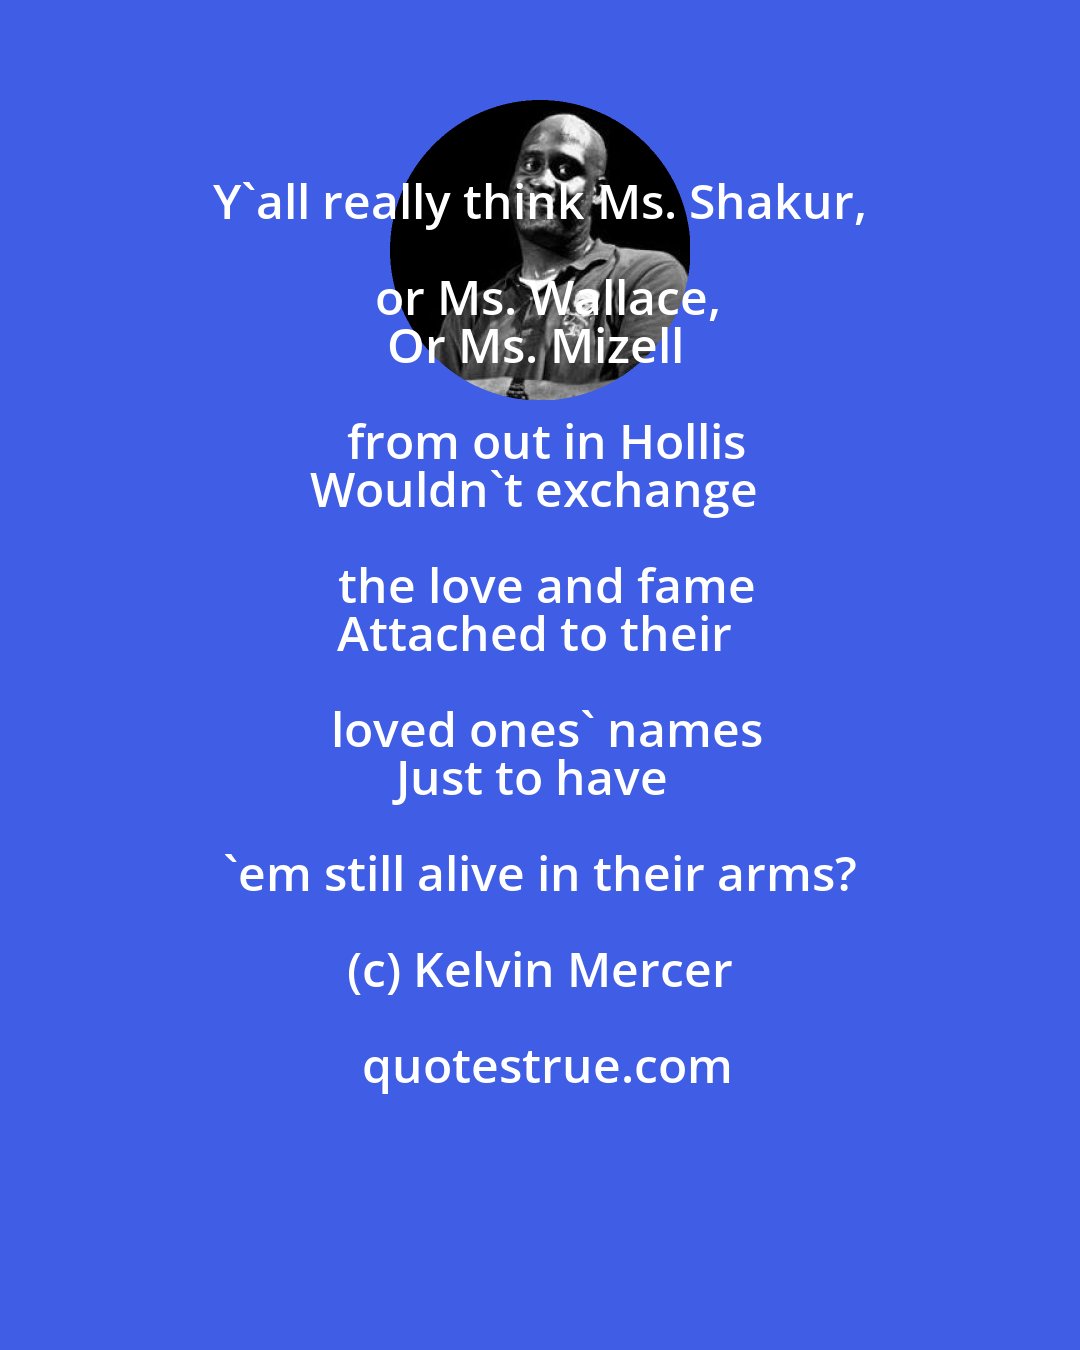 Kelvin Mercer: Y'all really think Ms. Shakur, or Ms. Wallace,
Or Ms. Mizell from out in Hollis
Wouldn't exchange the love and fame
Attached to their loved ones' names
Just to have 'em still alive in their arms?